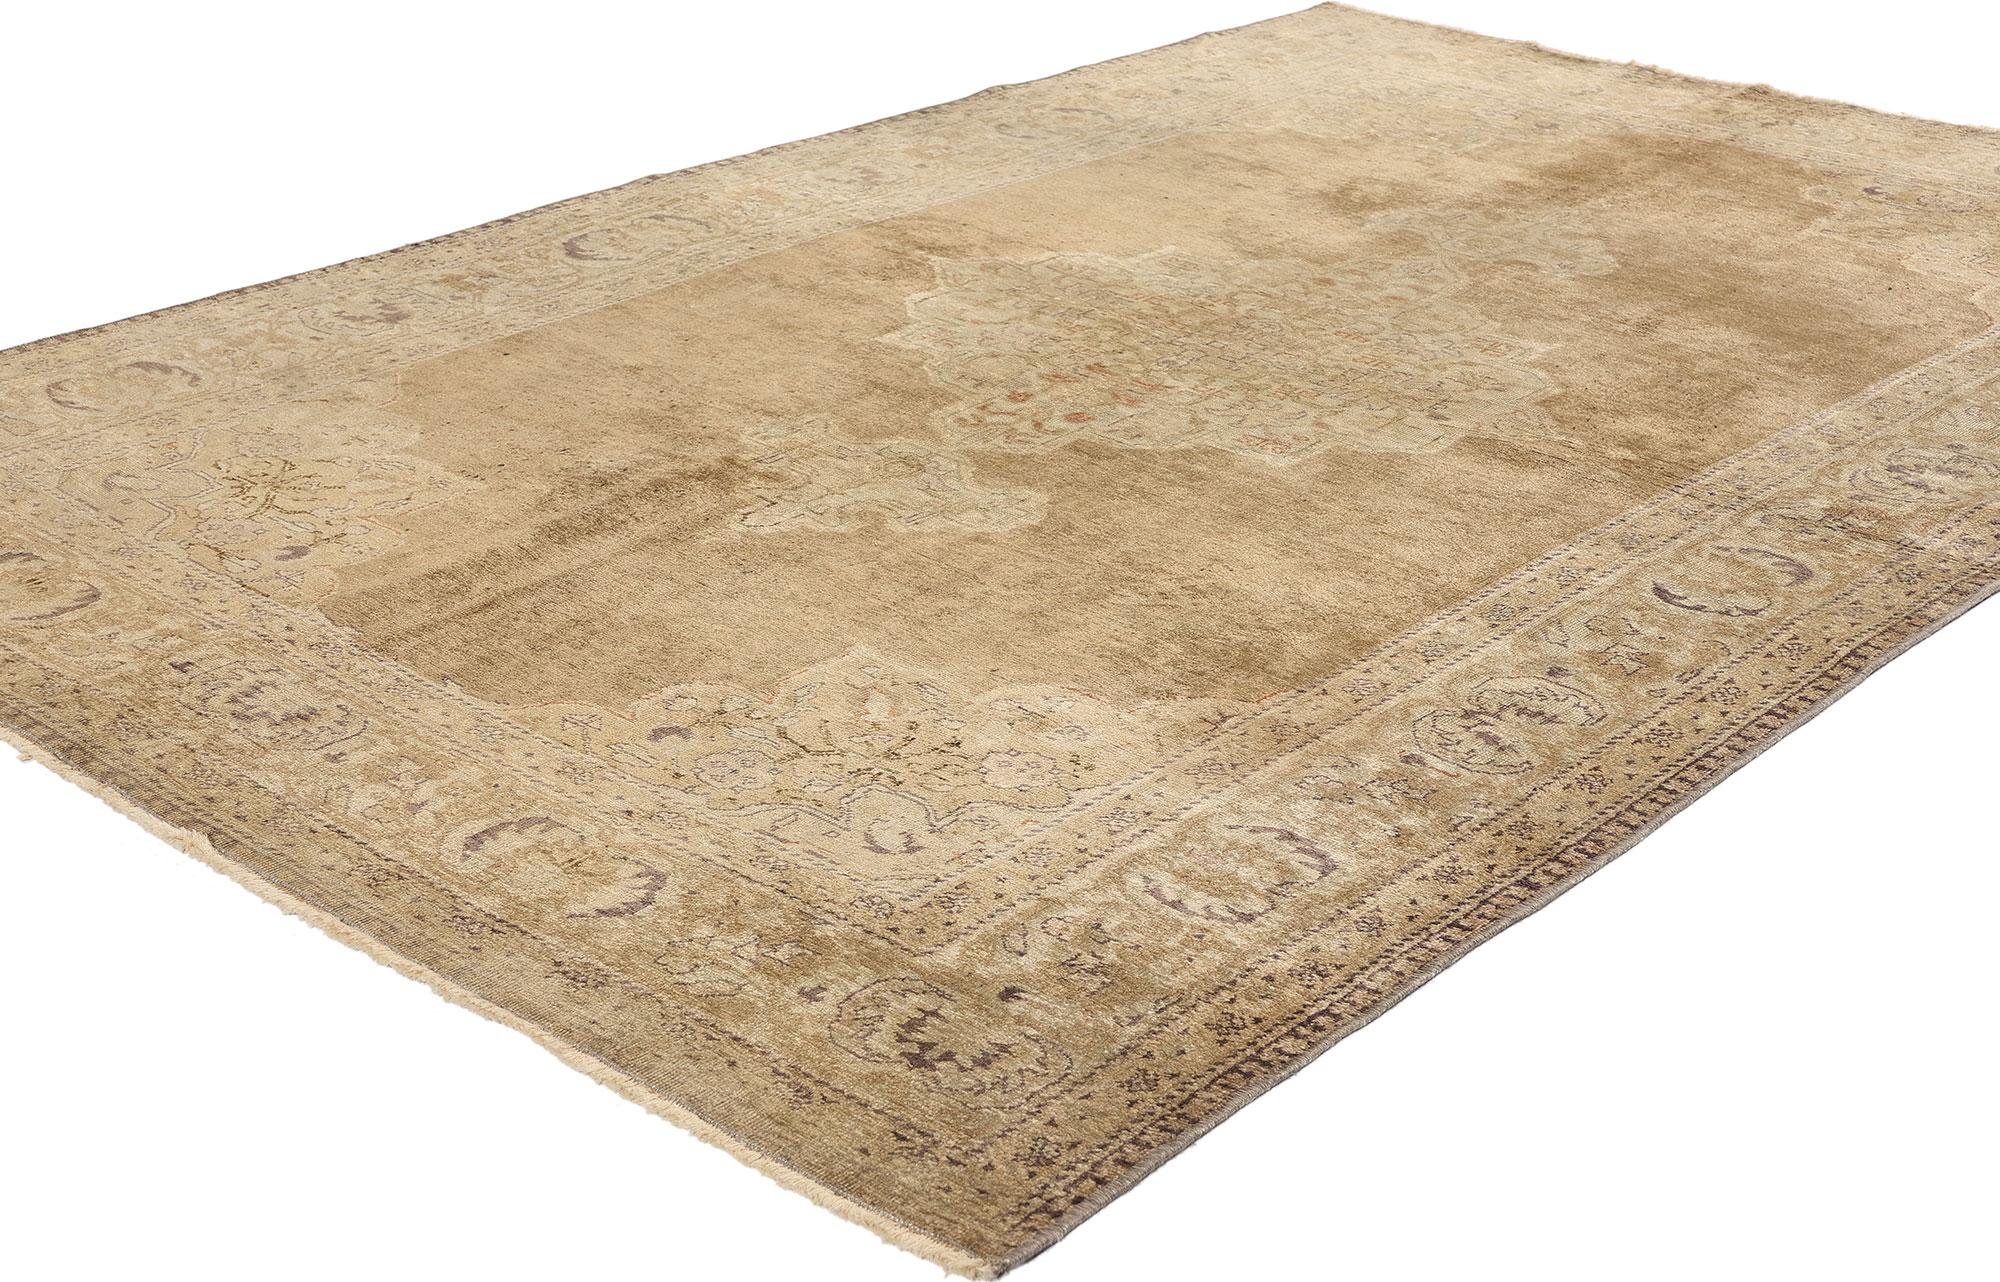 52071 Vintage Brown Turkish Oushak Rug, 04’09 x 07’01. Antique-washed Turkish Oushak rugs that are not distressed typically refer to Oushak rugs that have undergone a special washing process to impart them to soften their colors while keeping their